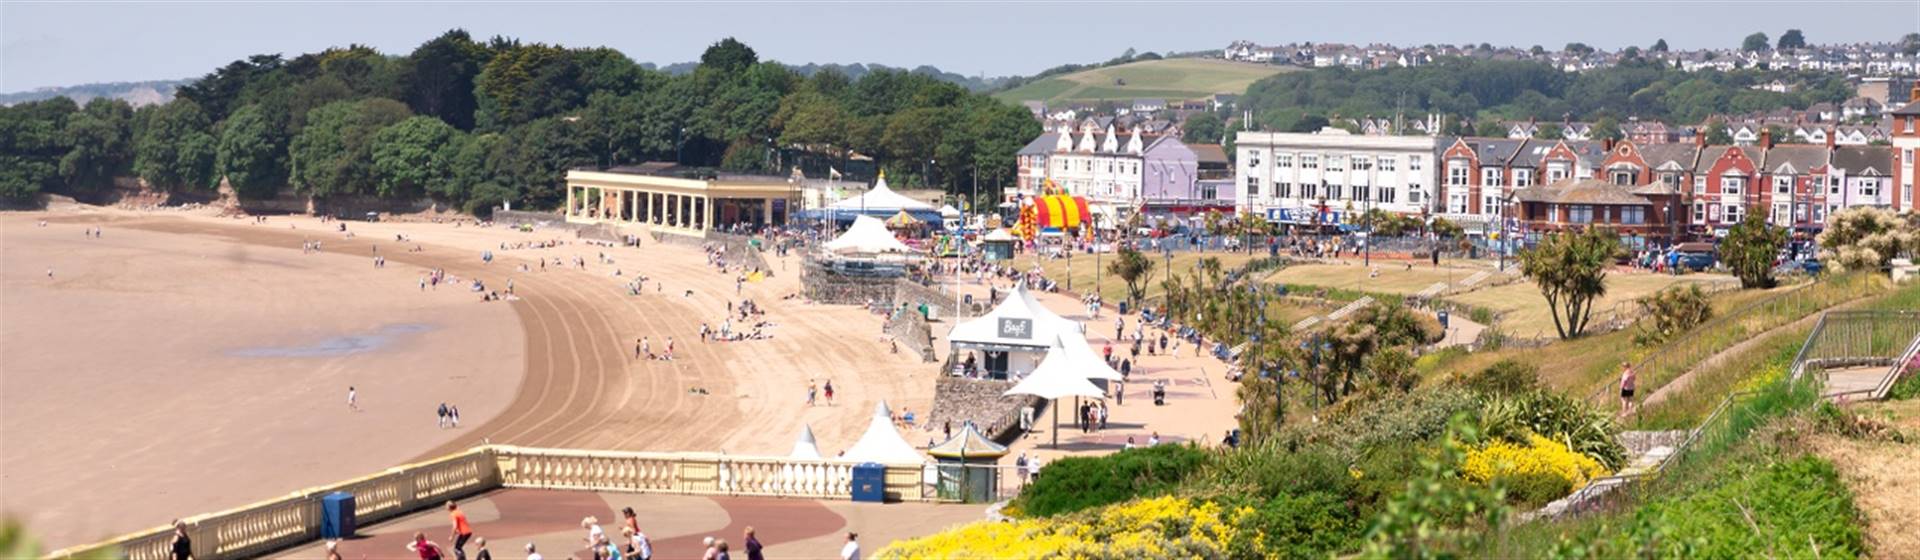 Barry Island - May Bank Holiday Special